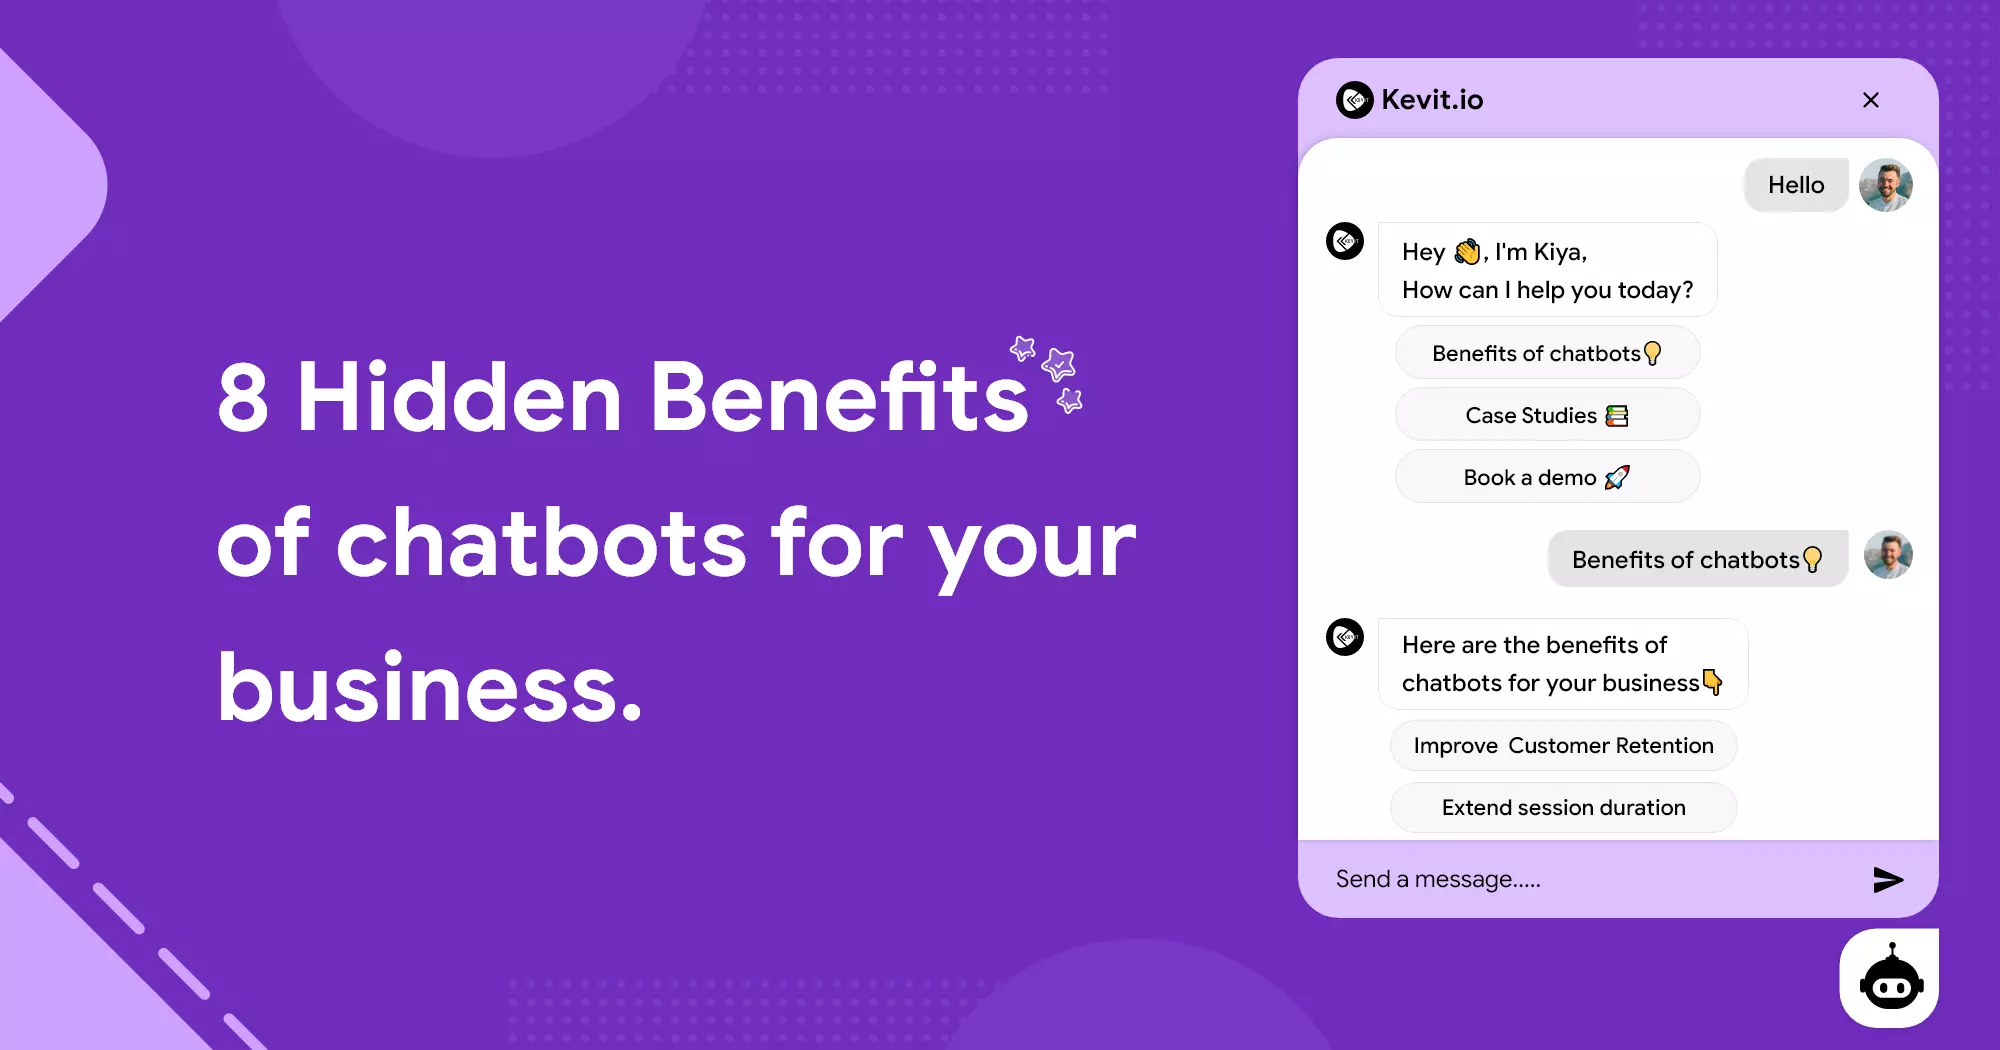 8 Hidden Benefits of Chatbots for your business